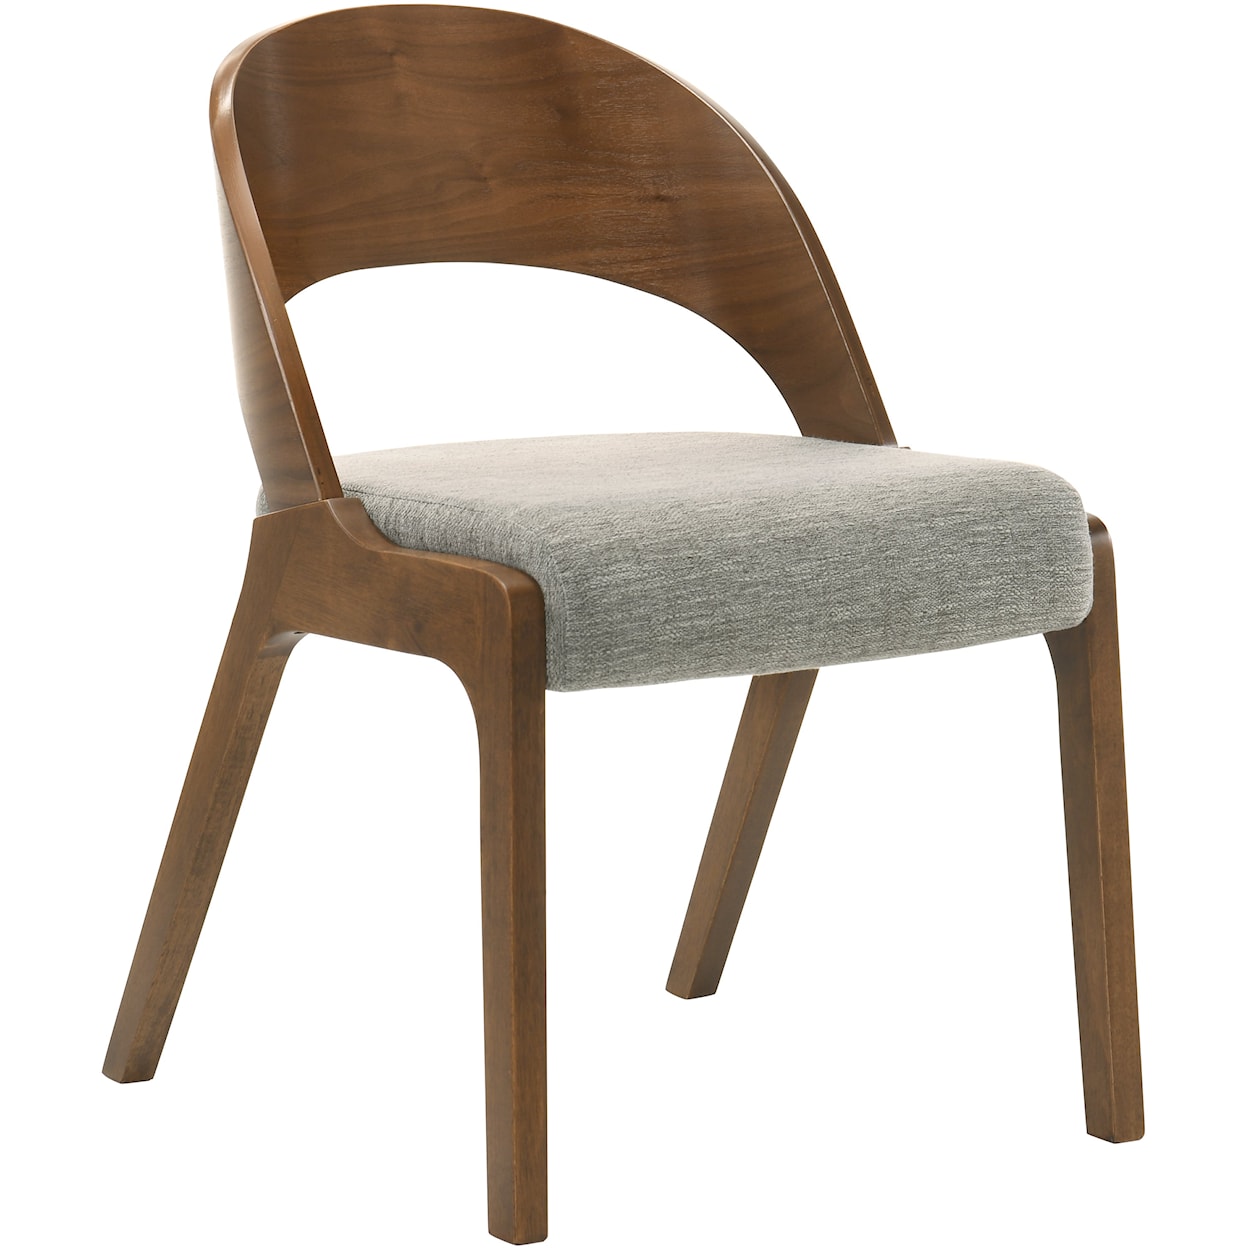 Meridian Furniture Woodson Dining Side Chair with Upholstered Seat